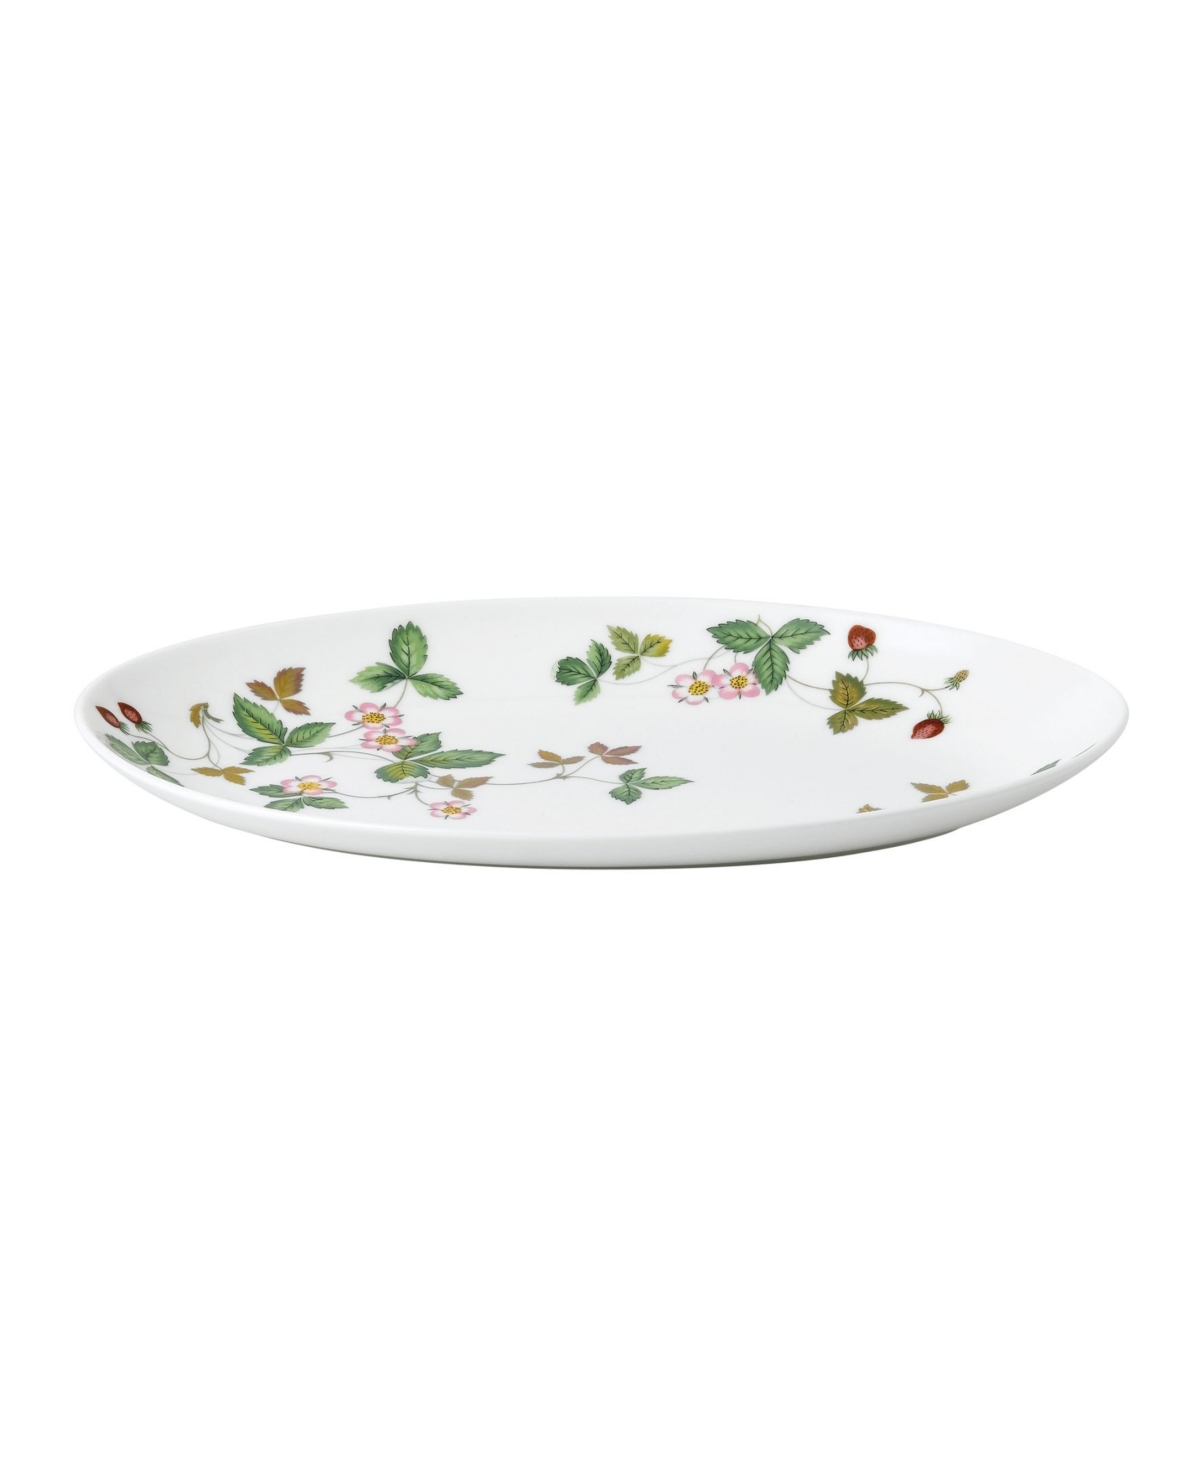 Wedgwood Wild Strawberry 10" Coupe Plate In Multi